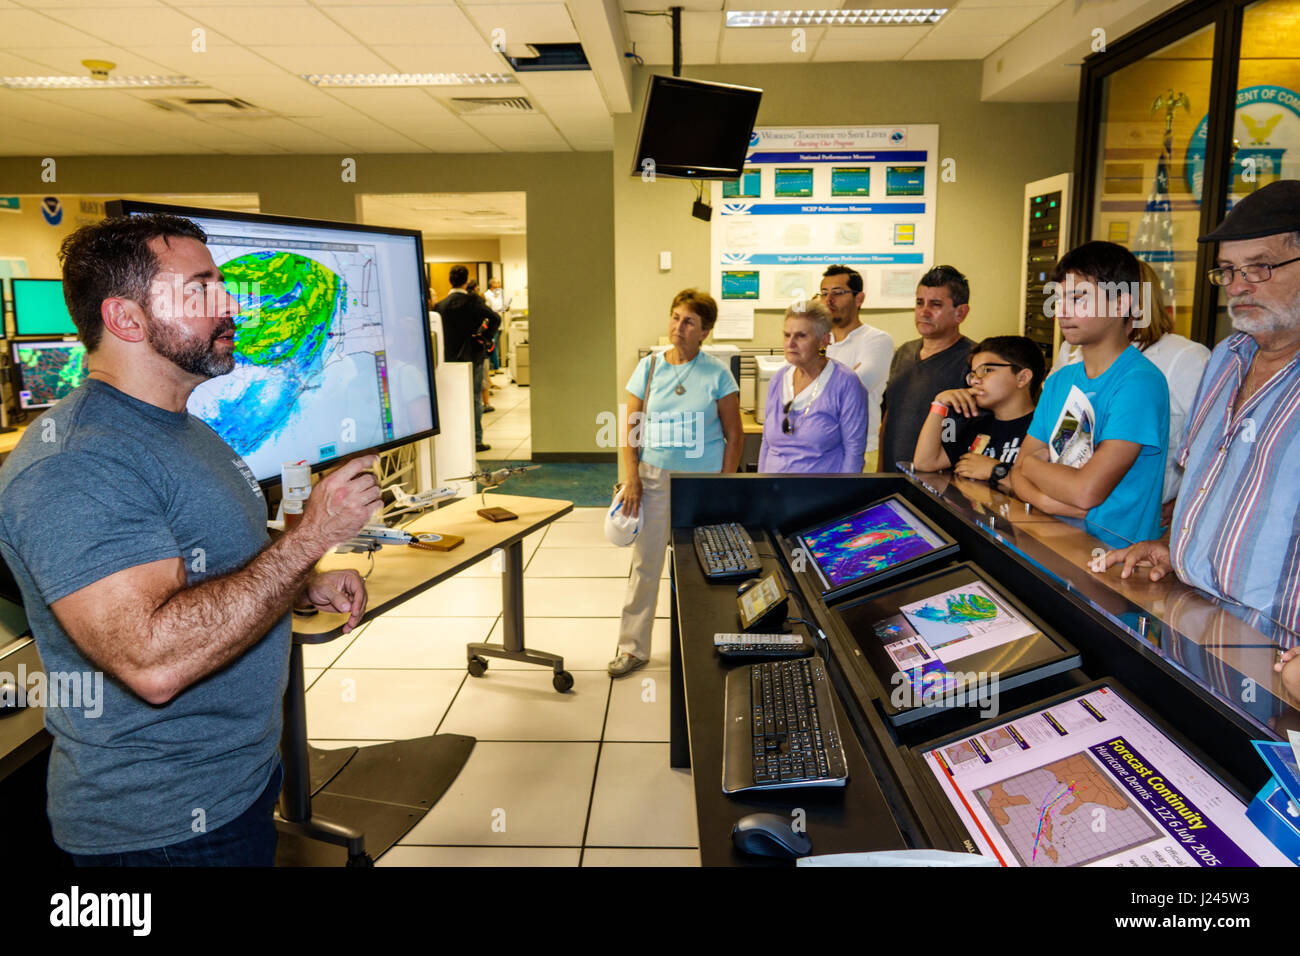 Miami Florida,National Hurricane Center,NHC,NOAA,National Weather Service,open house houses,interior inside,tropical analysis and forecast desk,TAFB,a Stock Photo